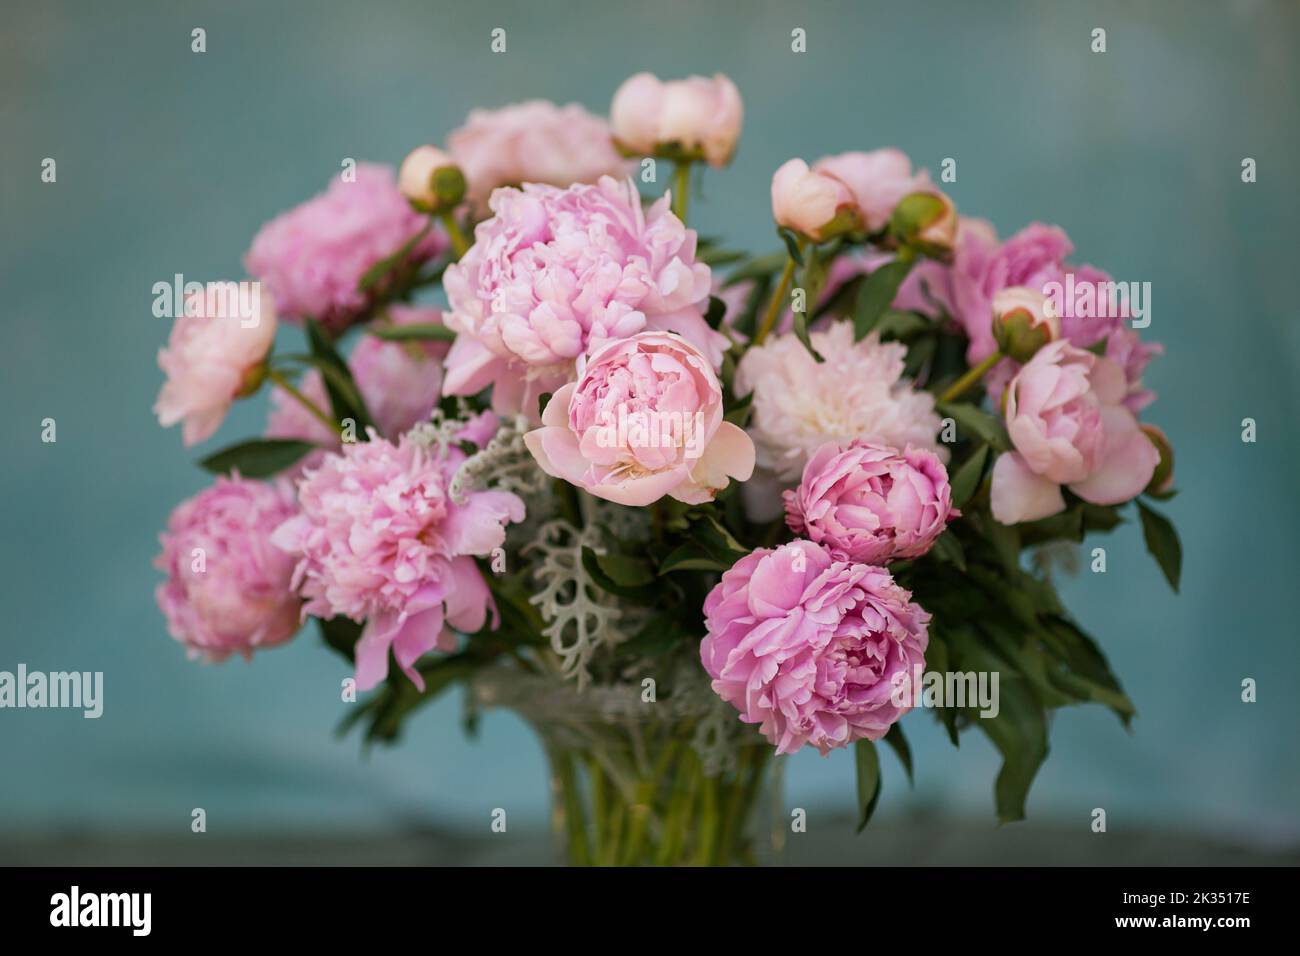 A bouquet of soft pink peonies in a vase. Stock Photo